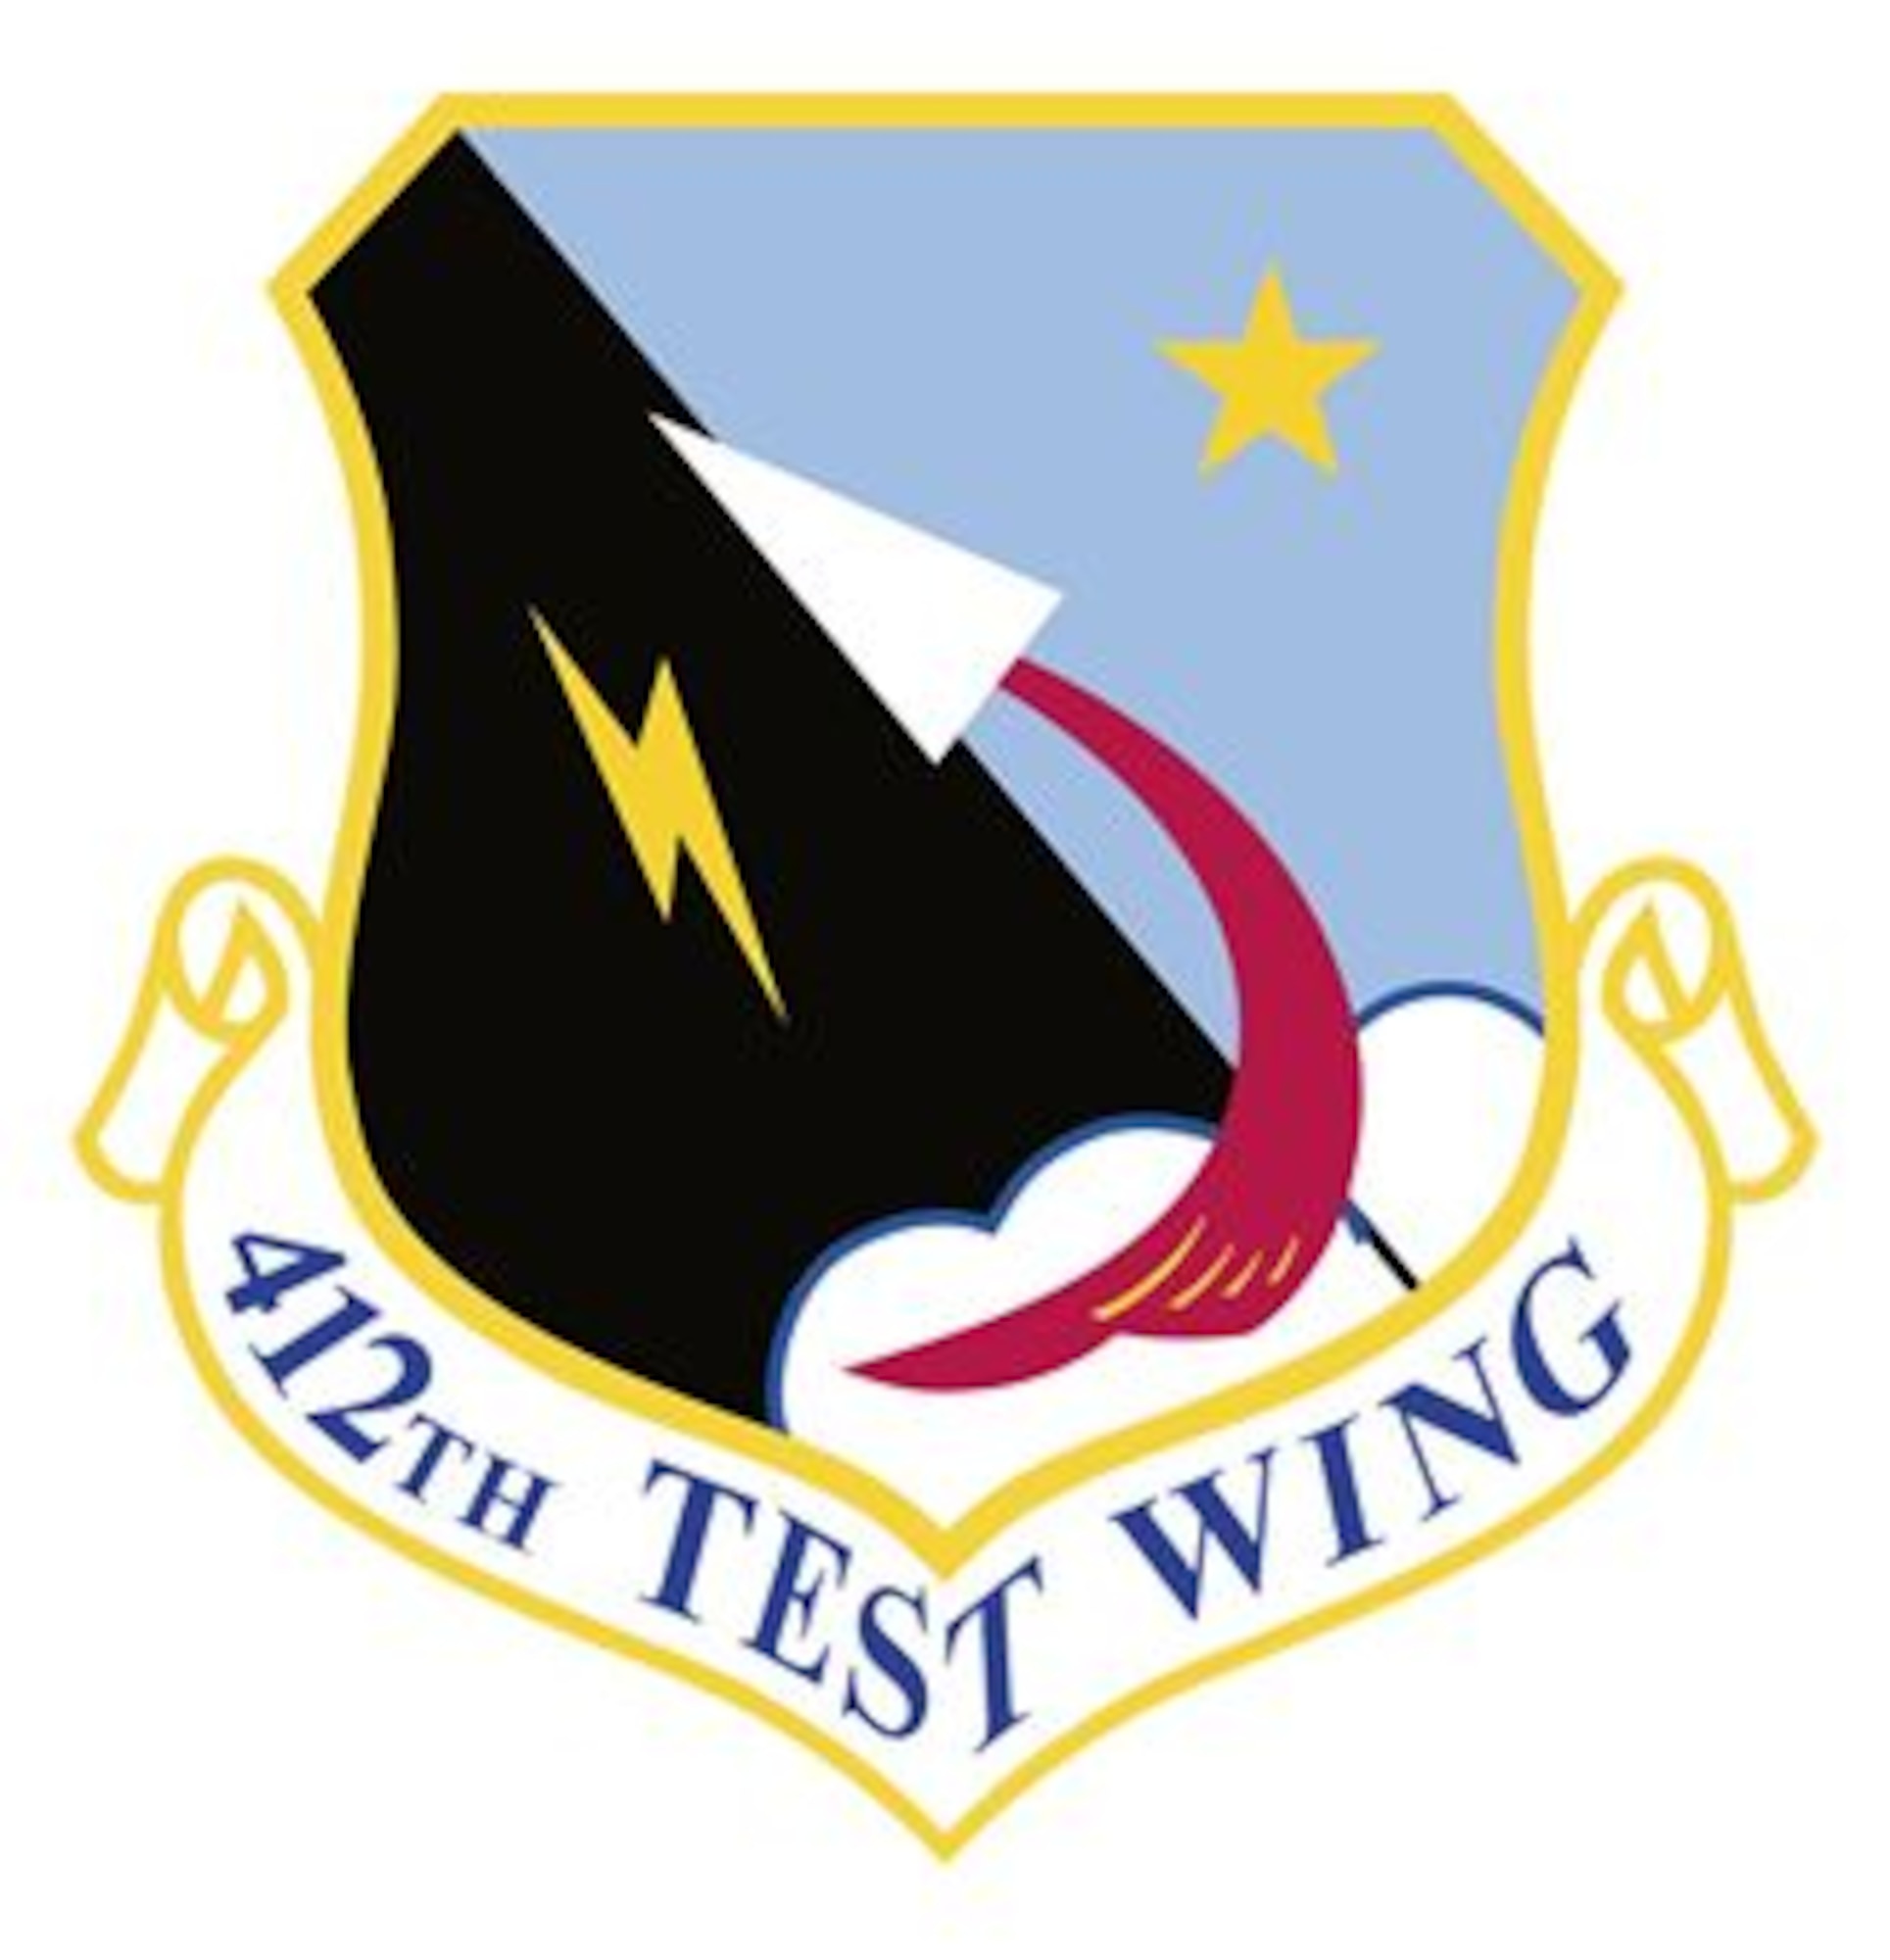 412th Test Wing, Edwards Air Force Base. CA